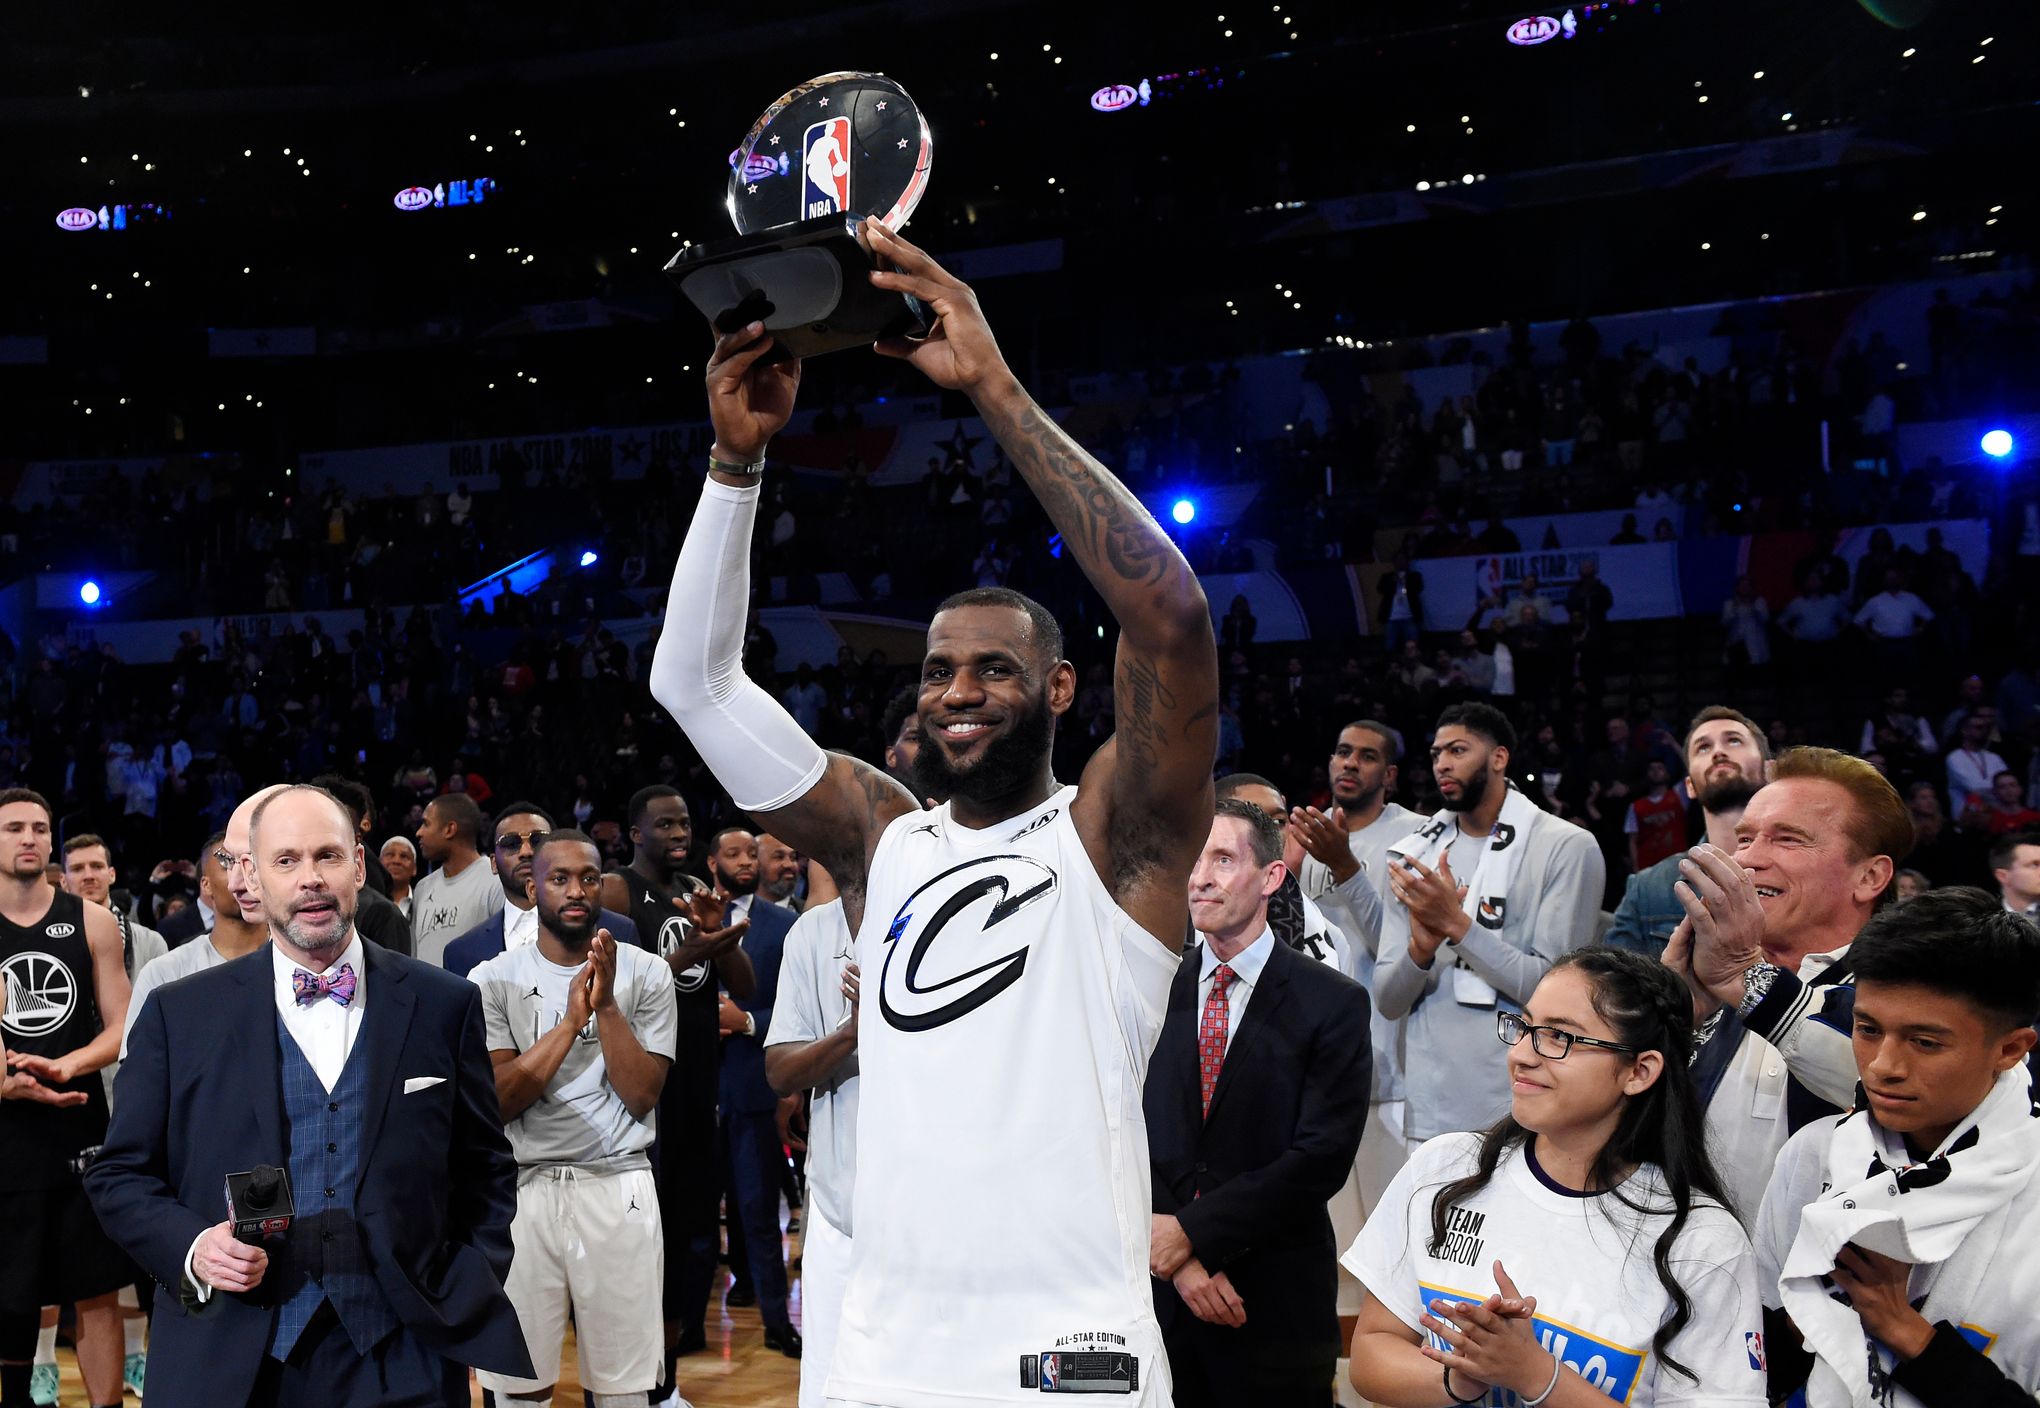 LeBron James leads team to competitive NBA All-Star win, takes MVP